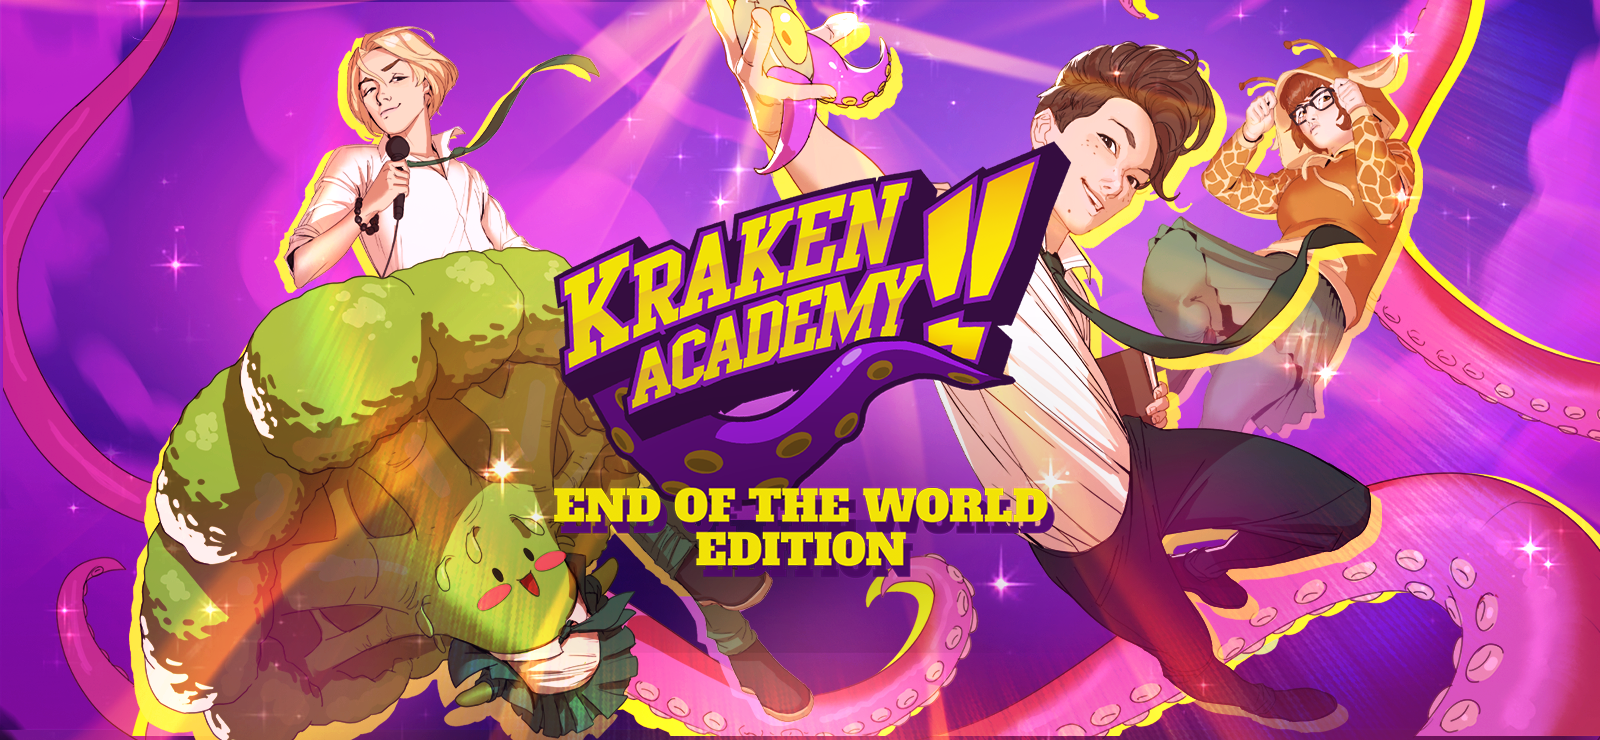 Kraken Academy!! End Of The World Edition